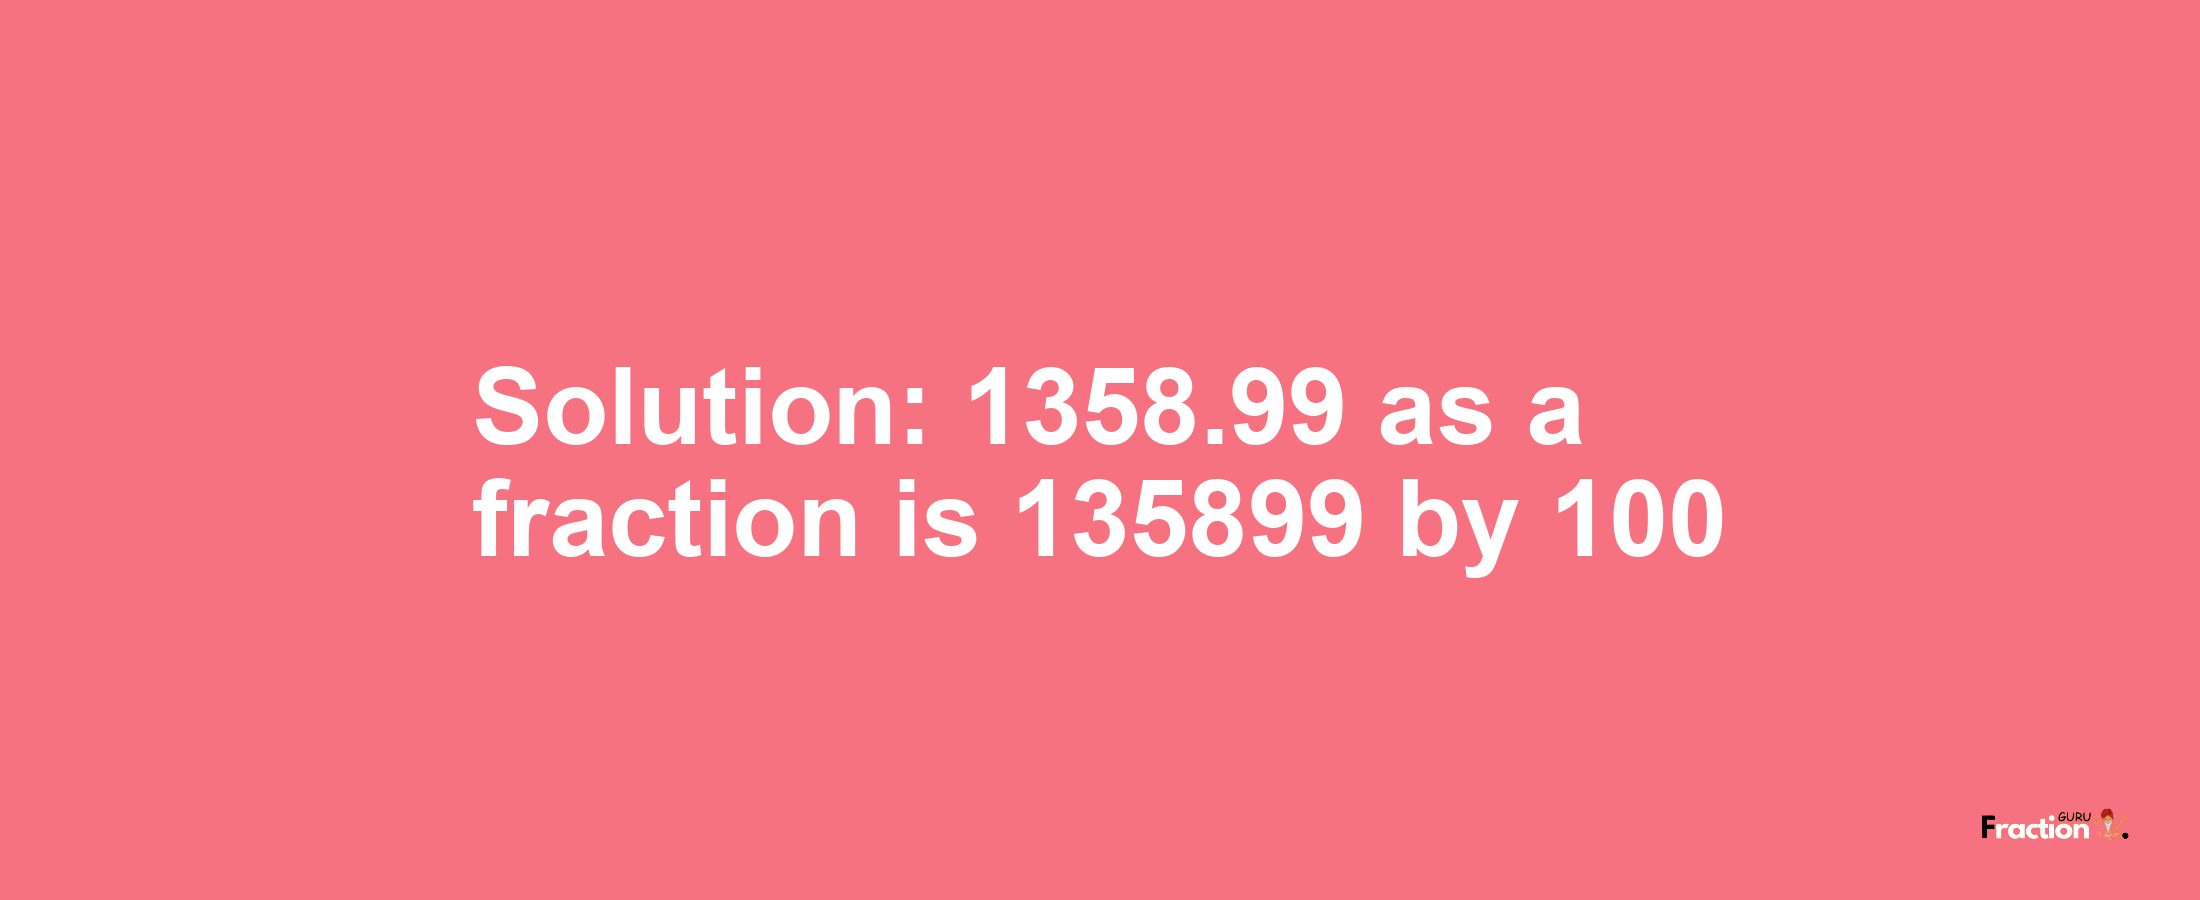 Solution:1358.99 as a fraction is 135899/100